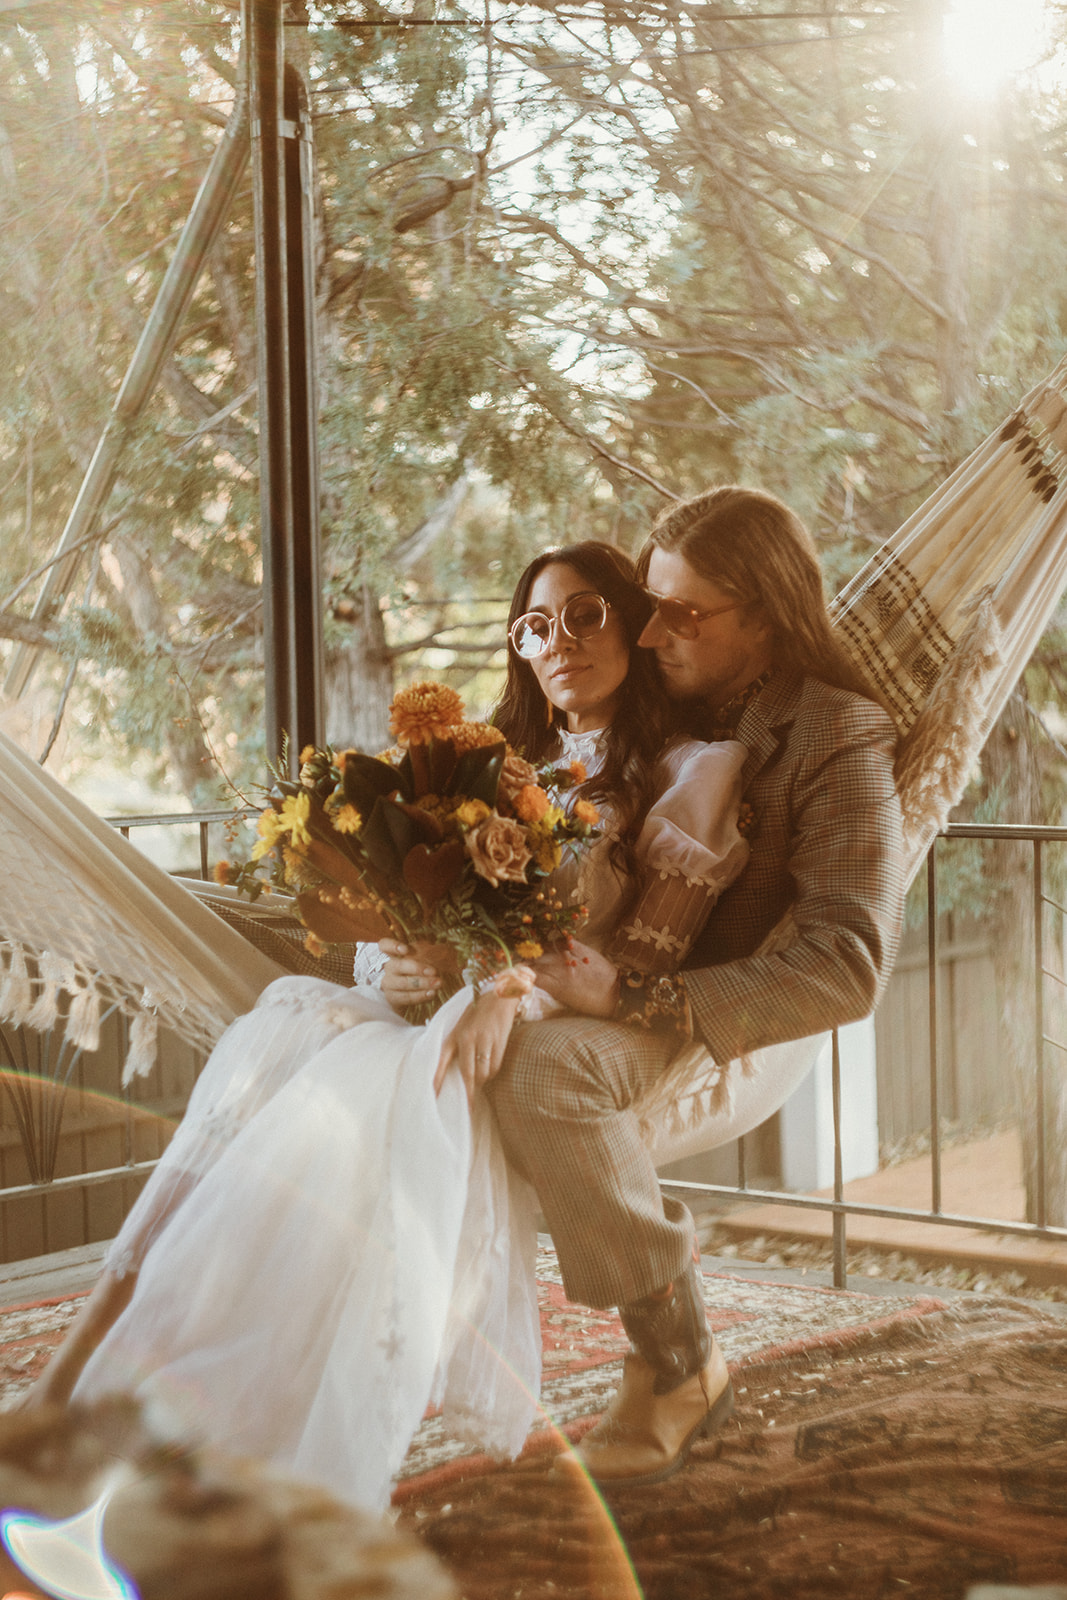 Dreamy retro inspired bride and groom in 70's attire share a moment on a macrame hammock